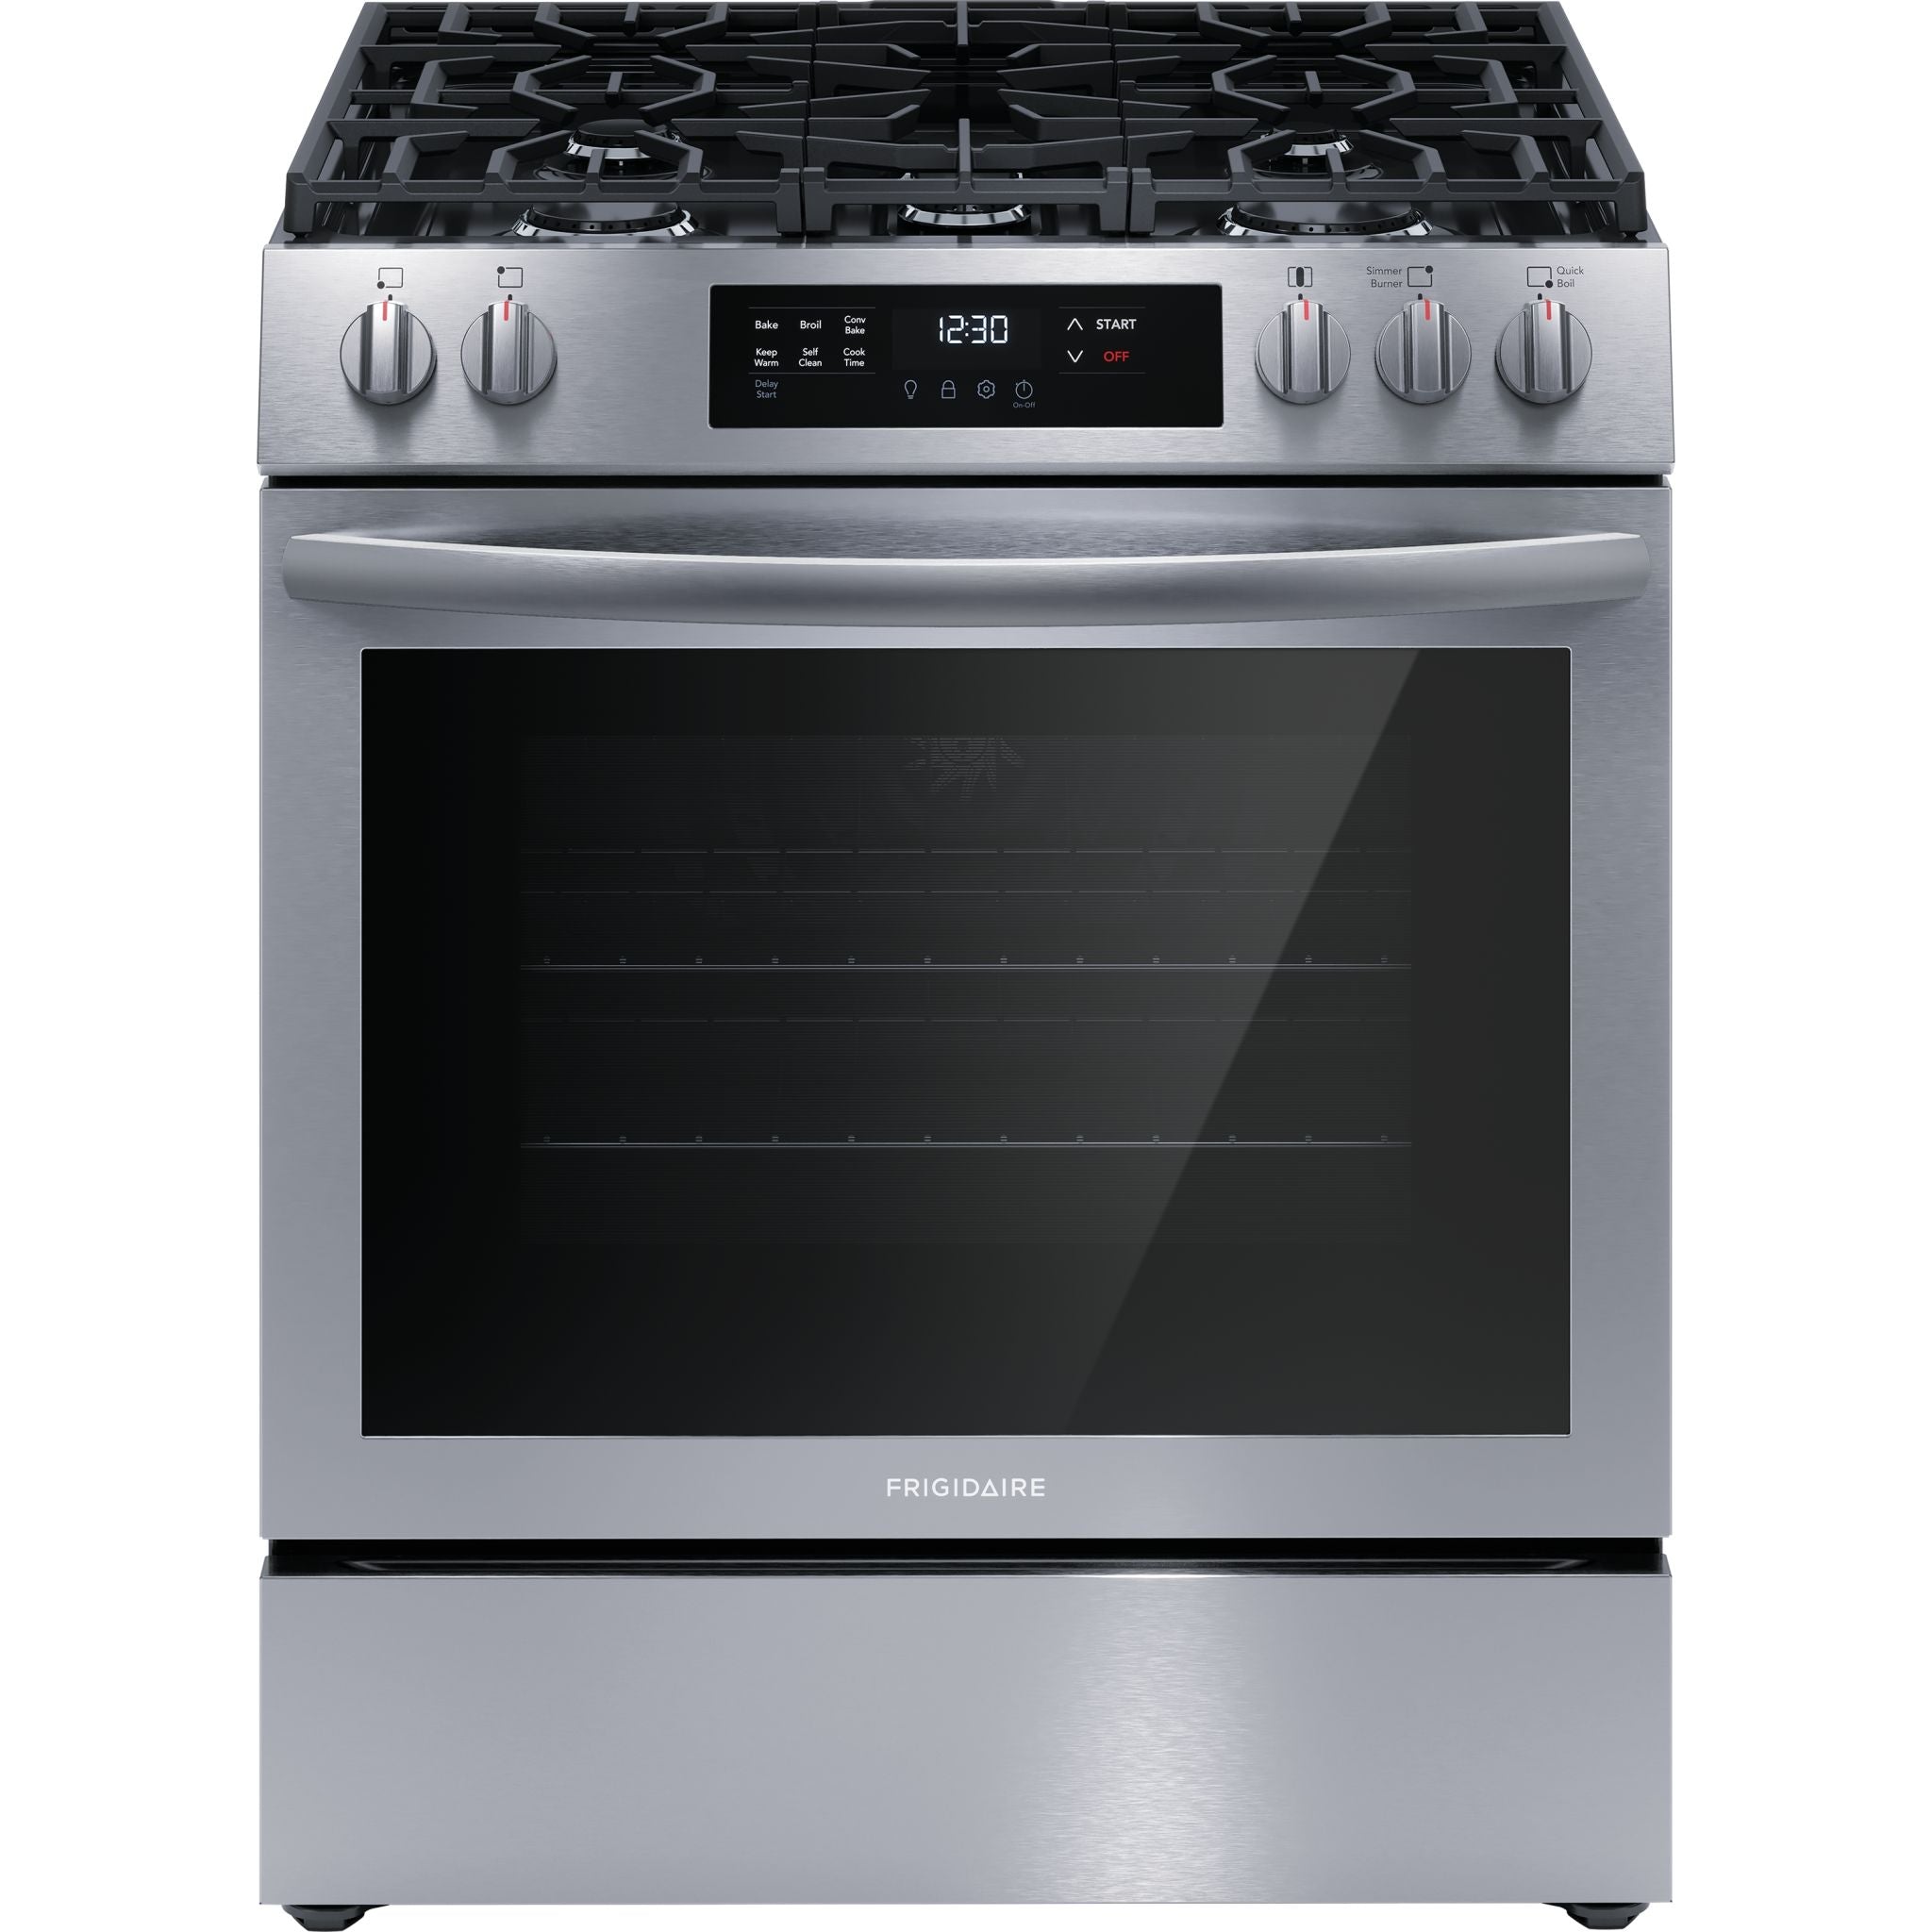 Frigidaire, Frigidaire 30" Electric Range (FCFG3083AS) - Stainless Steel